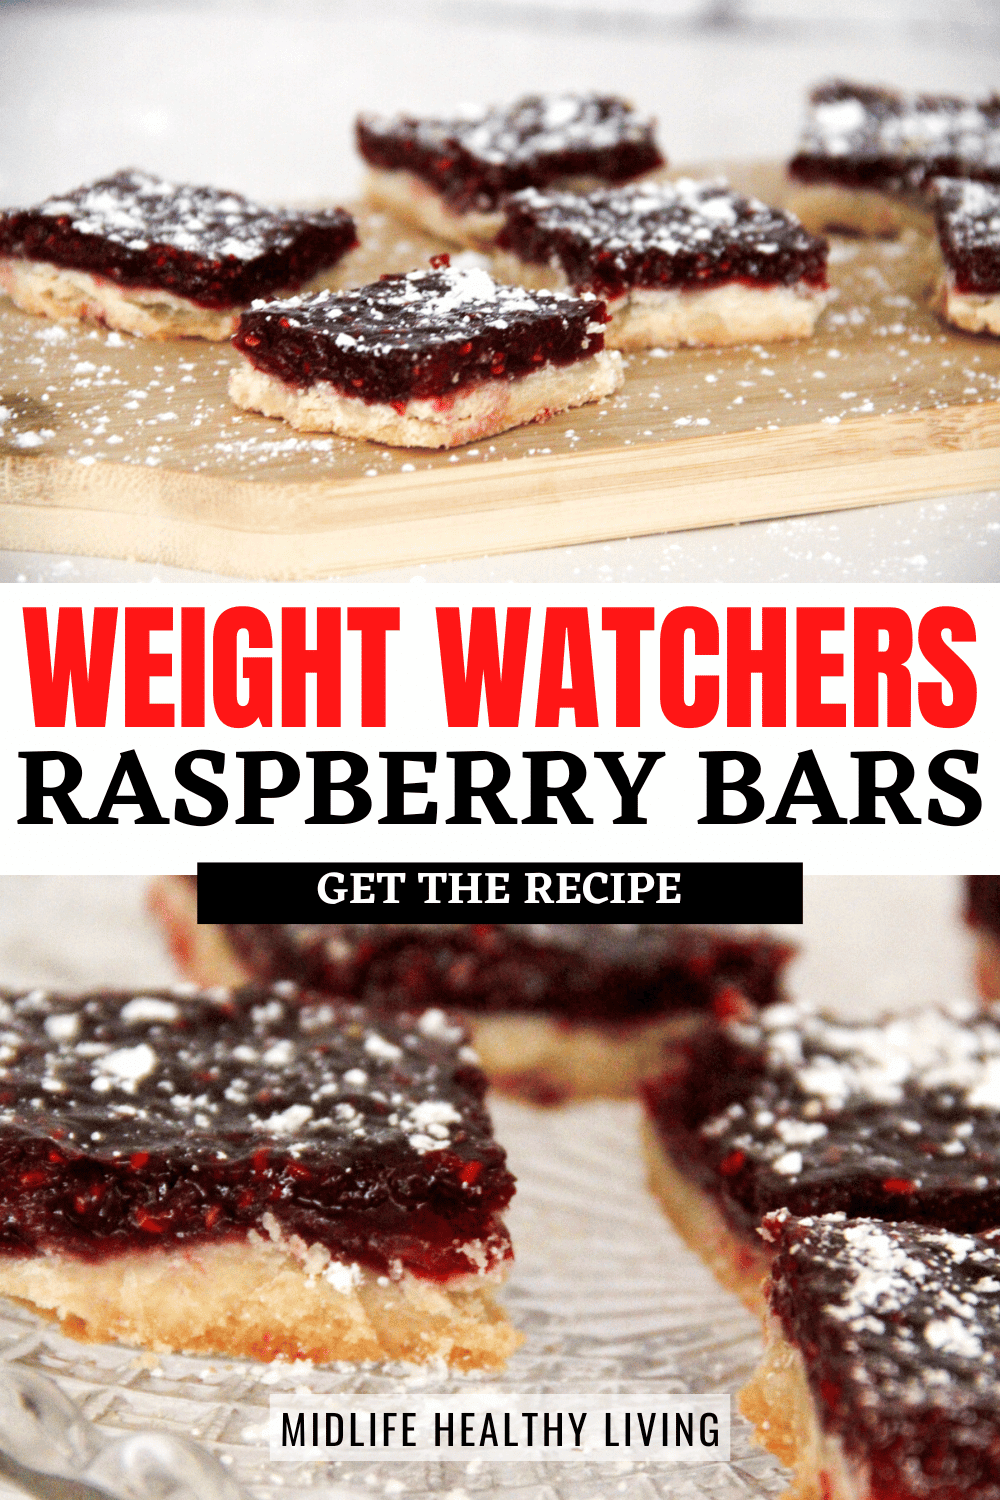 Weight watchers Raspberry Bars with just 4 points